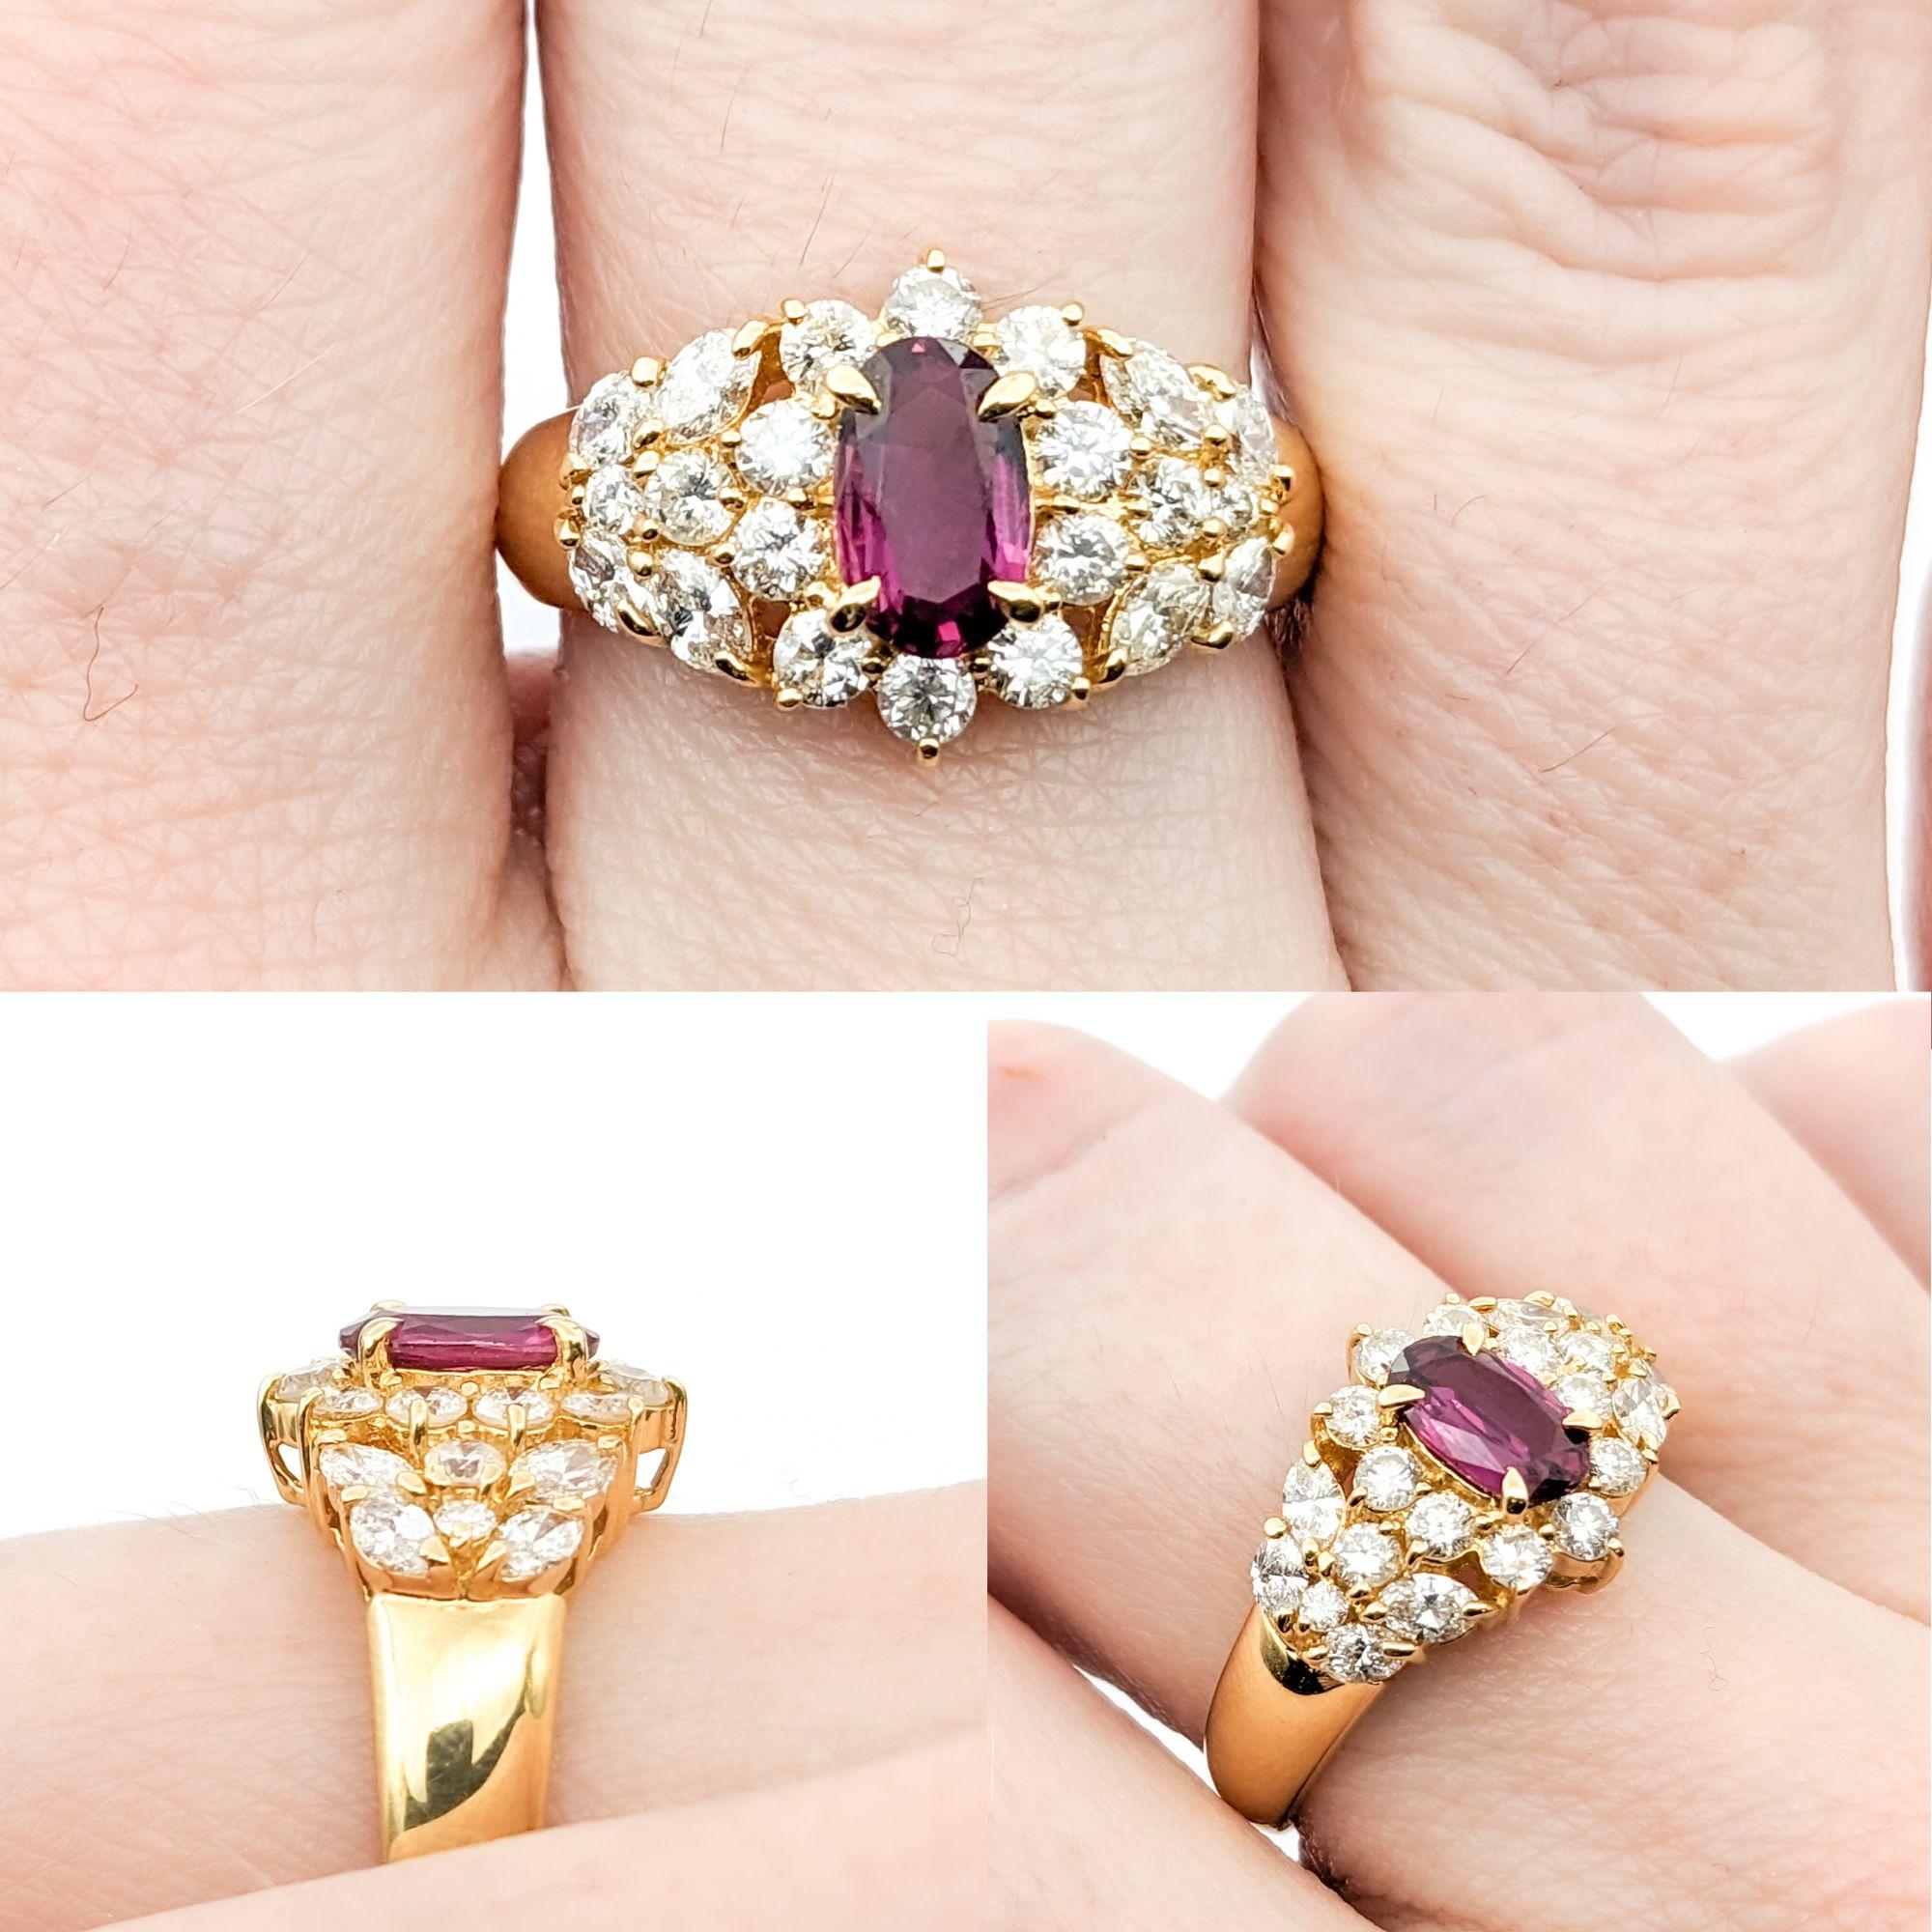 GIA .68ct Ruby & Diamond Ring In Yellow Gold

This ring is a gorgeous piece crafted in 18kt yellow gold, centered around a stunning 0.68ct ruby. It is surrounded by 0.88ctw of round diamonds, which are of VS clarity and a near colorless white hue,